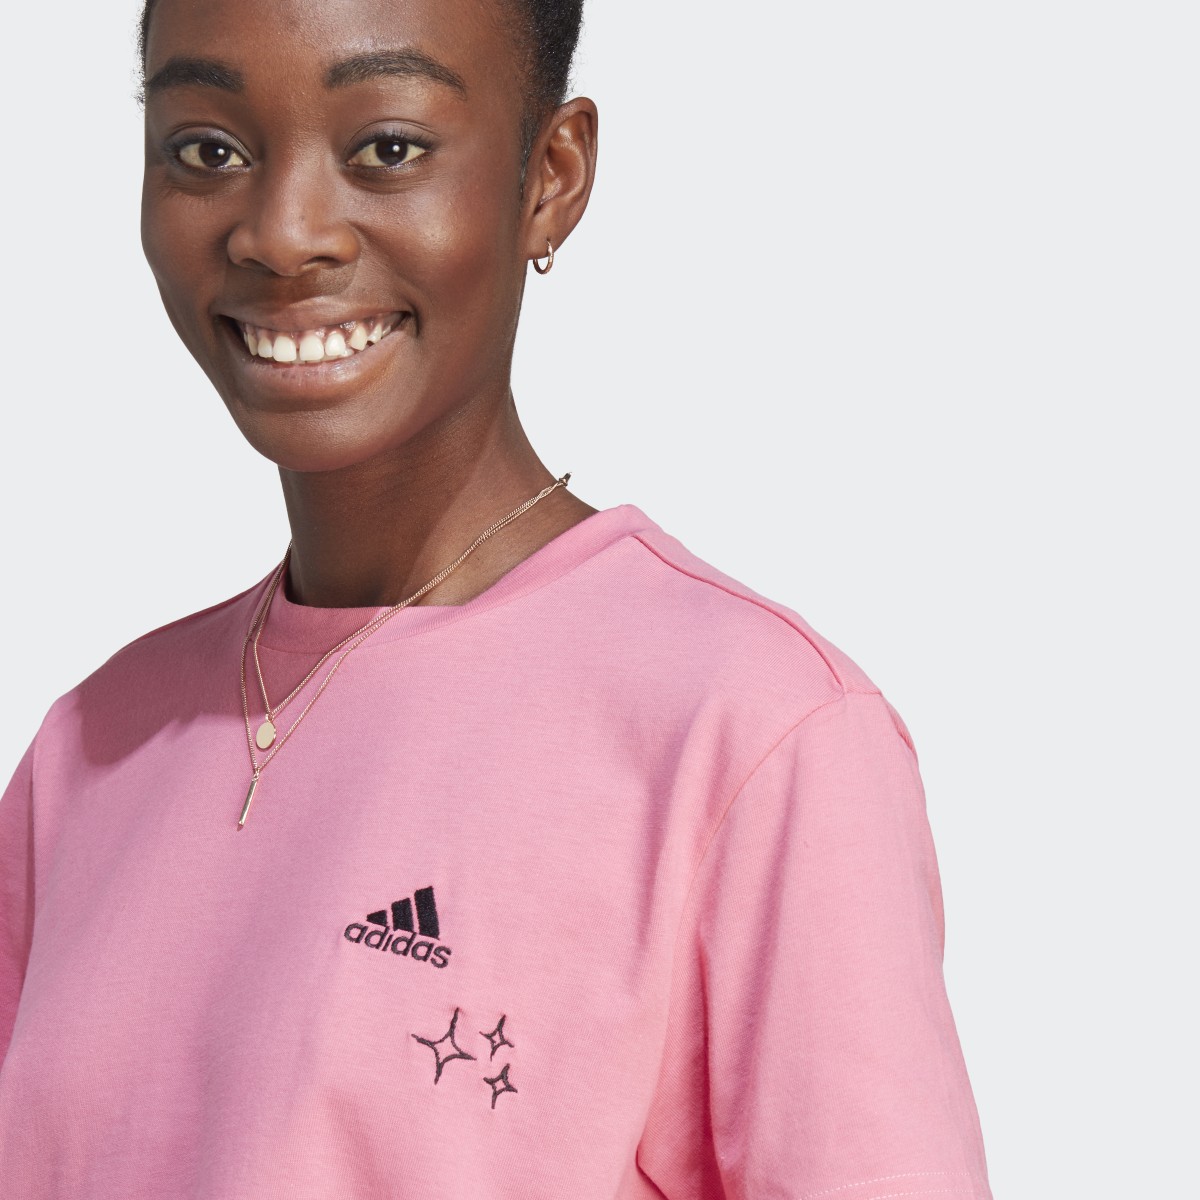 Adidas Scribble Embroidery Crop-Shirt. 9